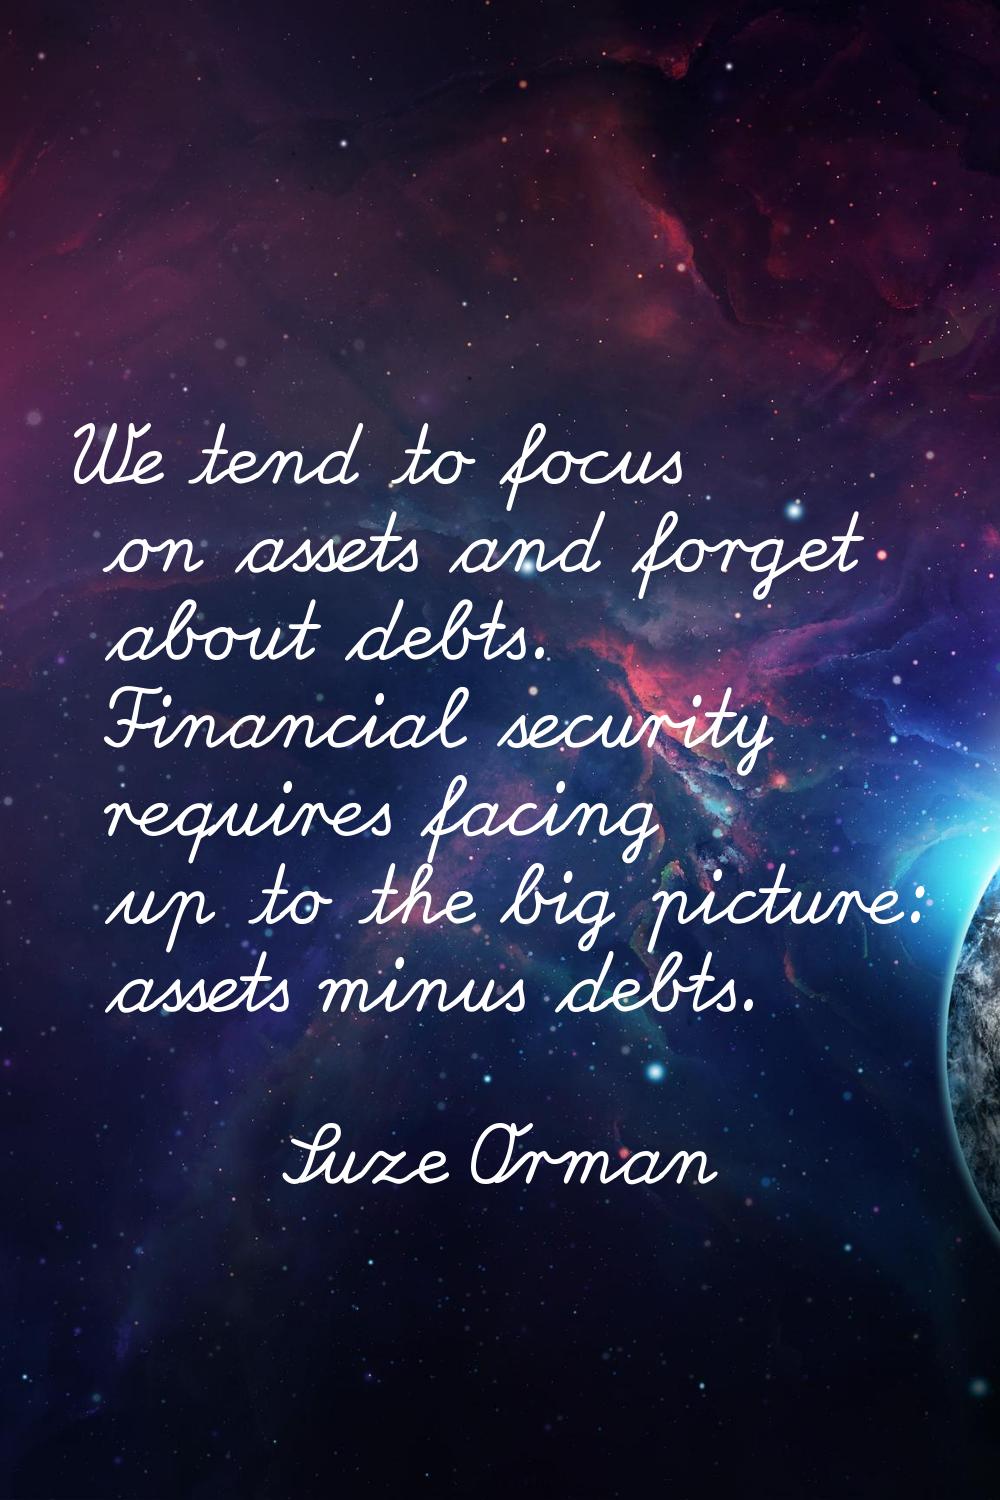 We tend to focus on assets and forget about debts. Financial security requires facing up to the big